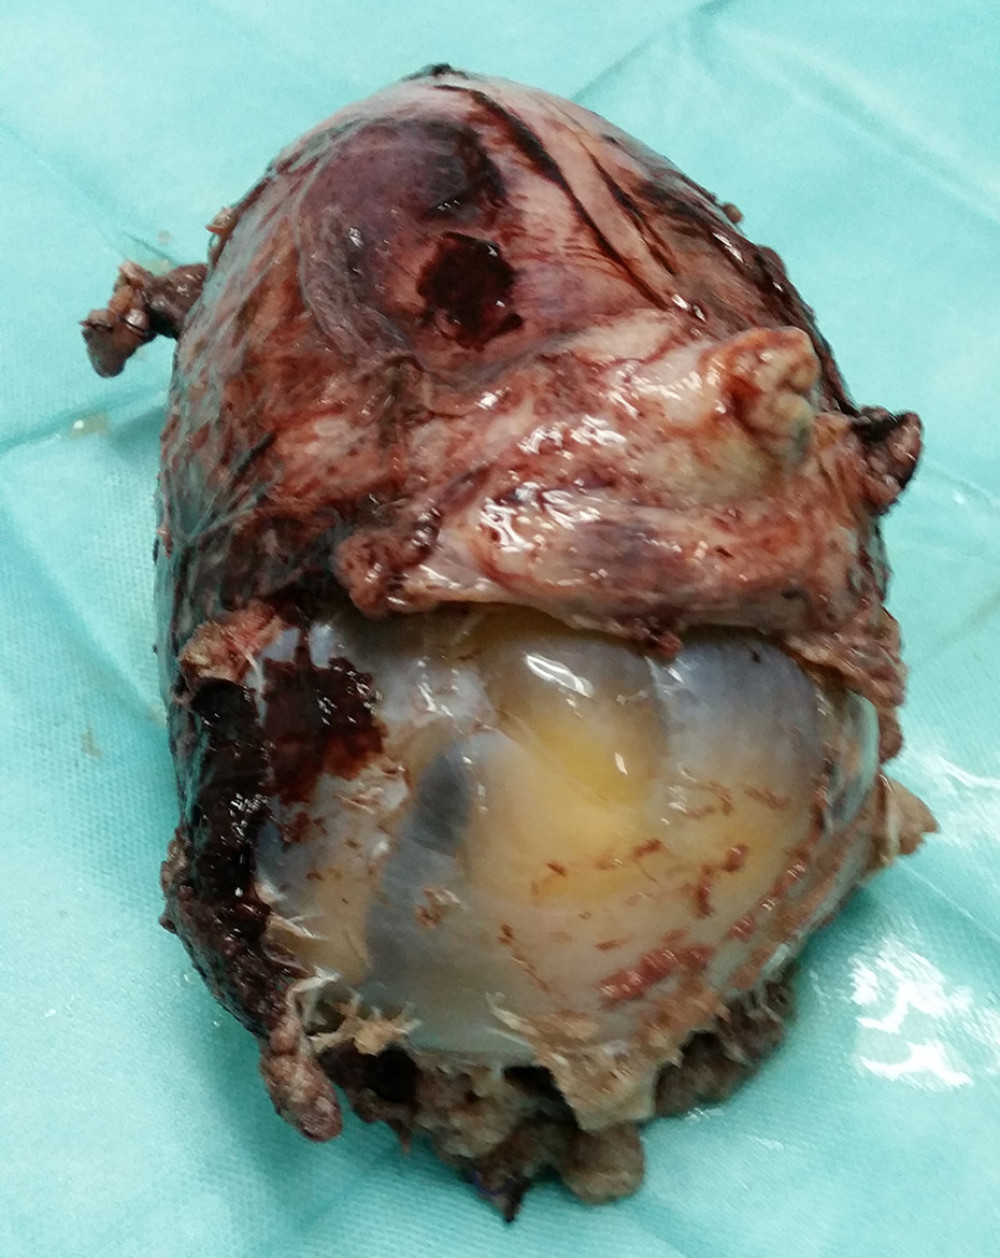 Post subtotal hysterectomy specimen showing uterine rupture with intact amniotic sac and fetus in situ.